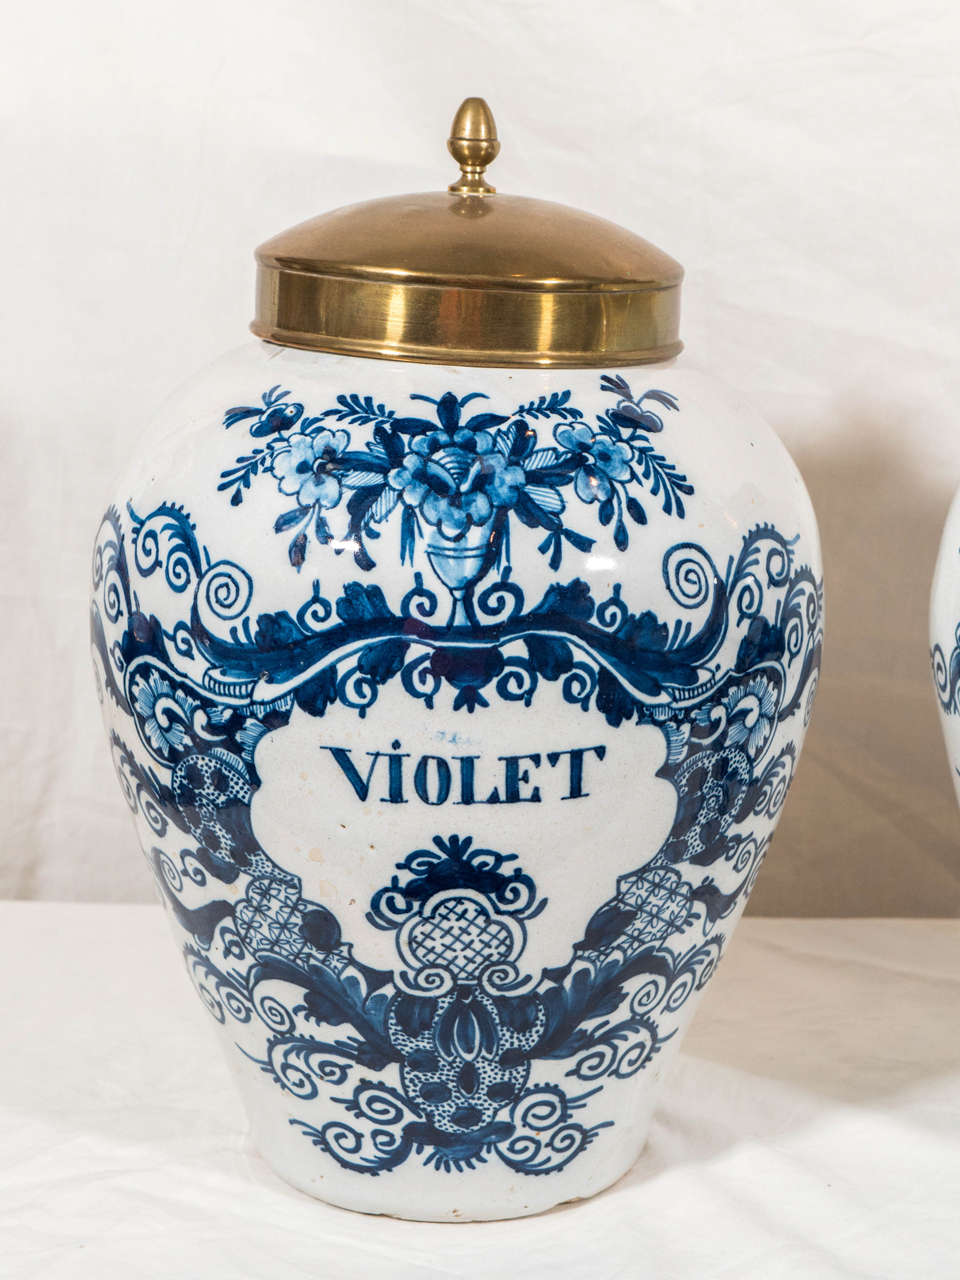 A pair of 18th century Dutch delft tobacco jars of ovoid form decorated in blue and white with the inscriptions 